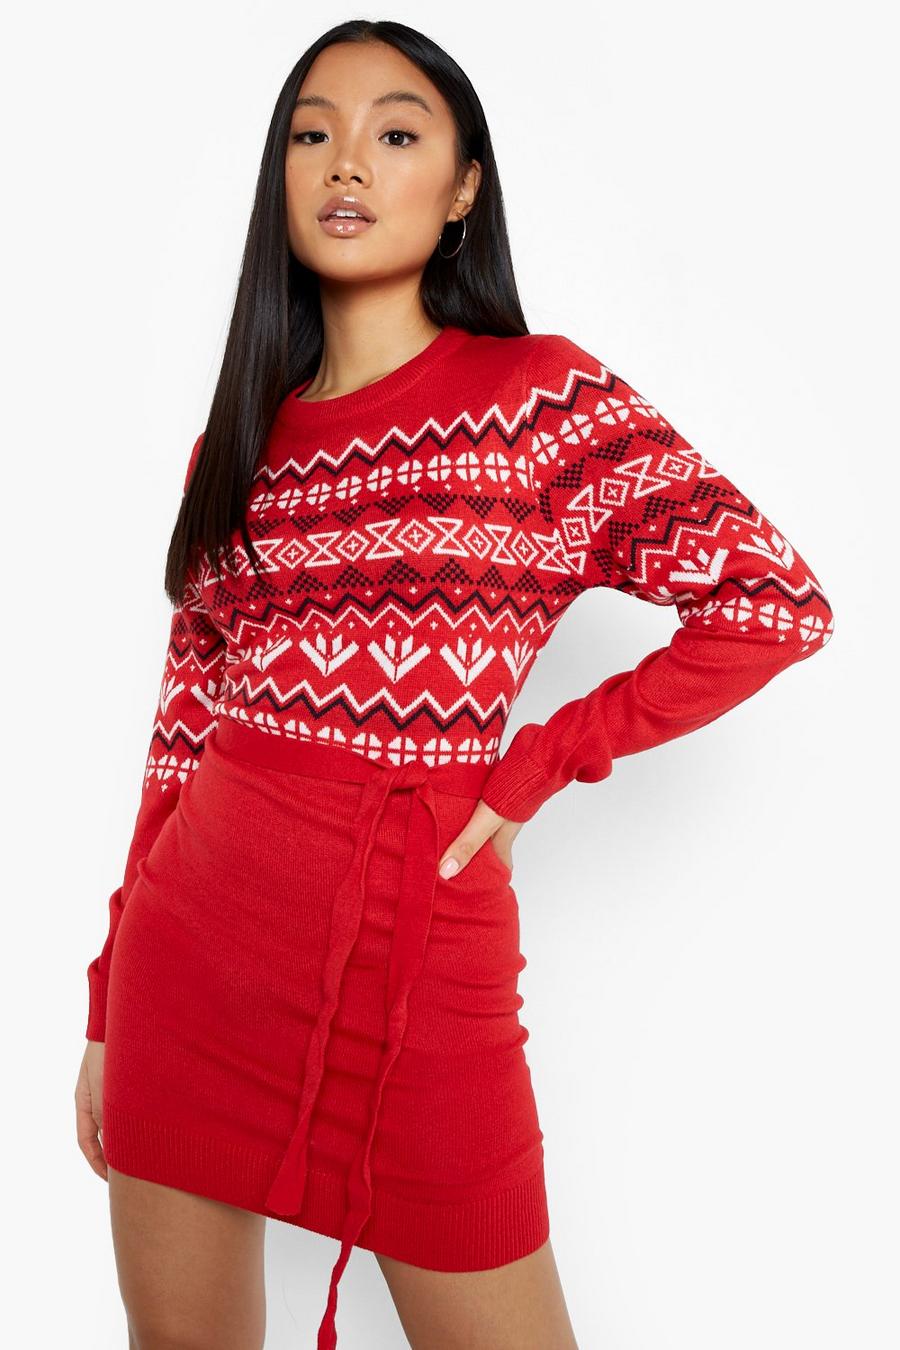 Red Petite Belted Knitted Christmas Jumper Dress